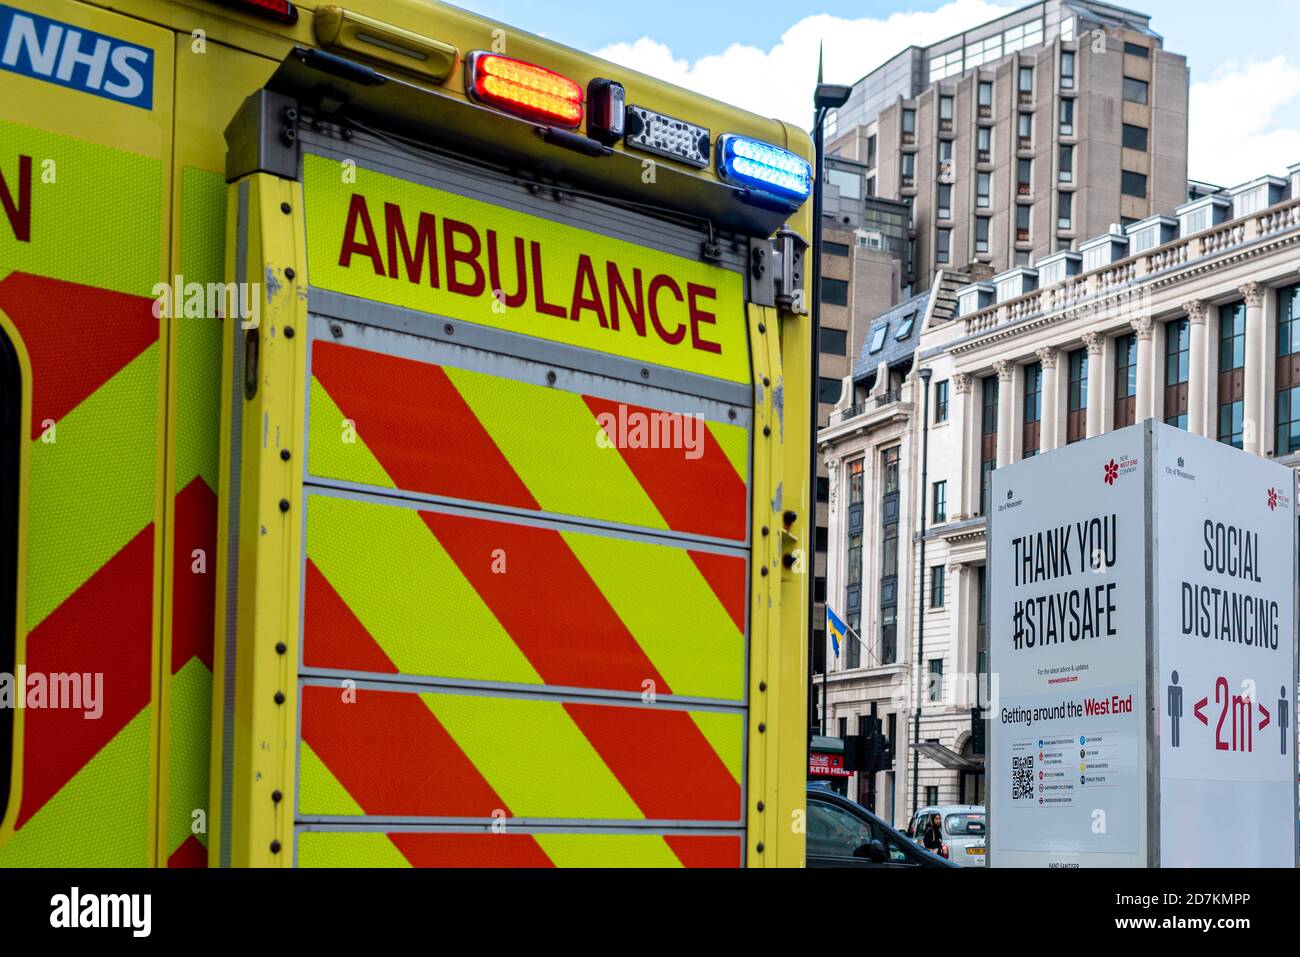 London, United Kingdom- October 22 2020: Social Distancing Sign in background with the back of an UK Ambulance parked next to it. London is... Stock Photo